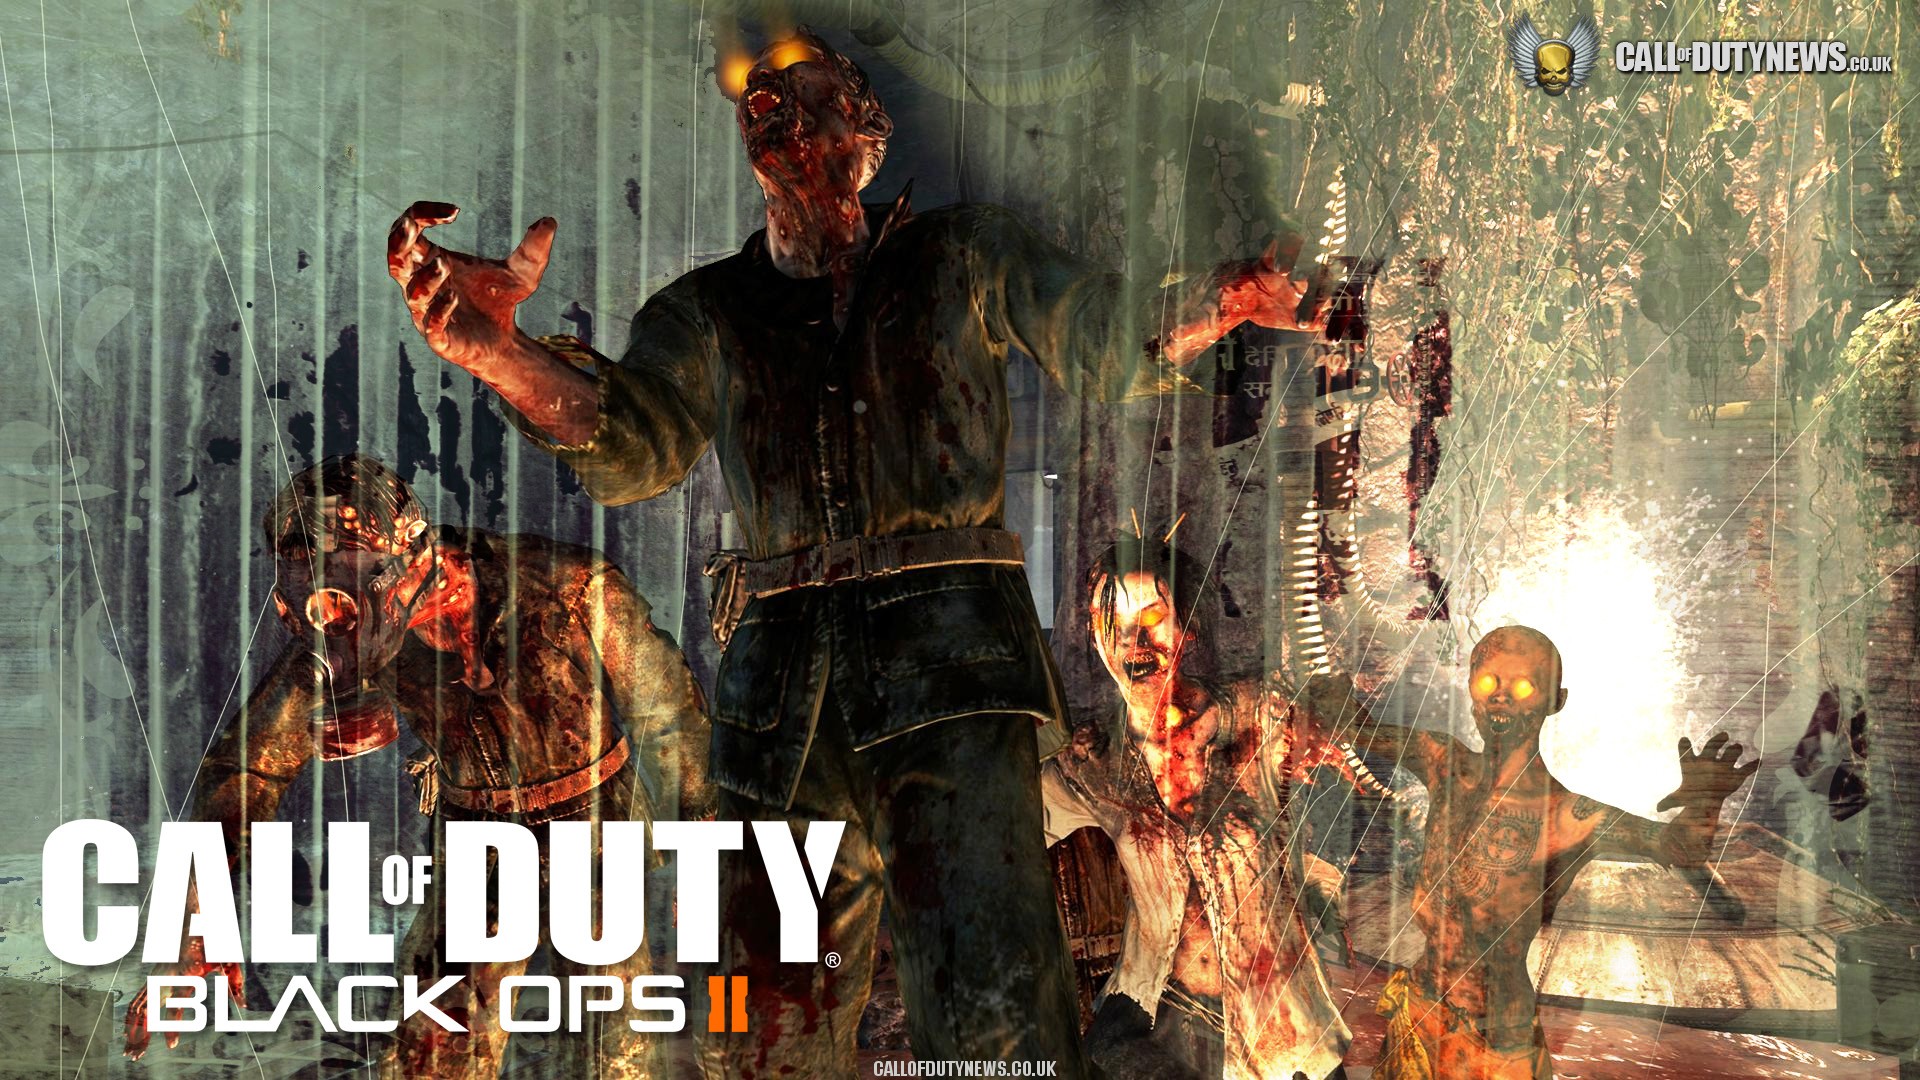 Duty Black Ops Zombies Wallpaper HDcall Of